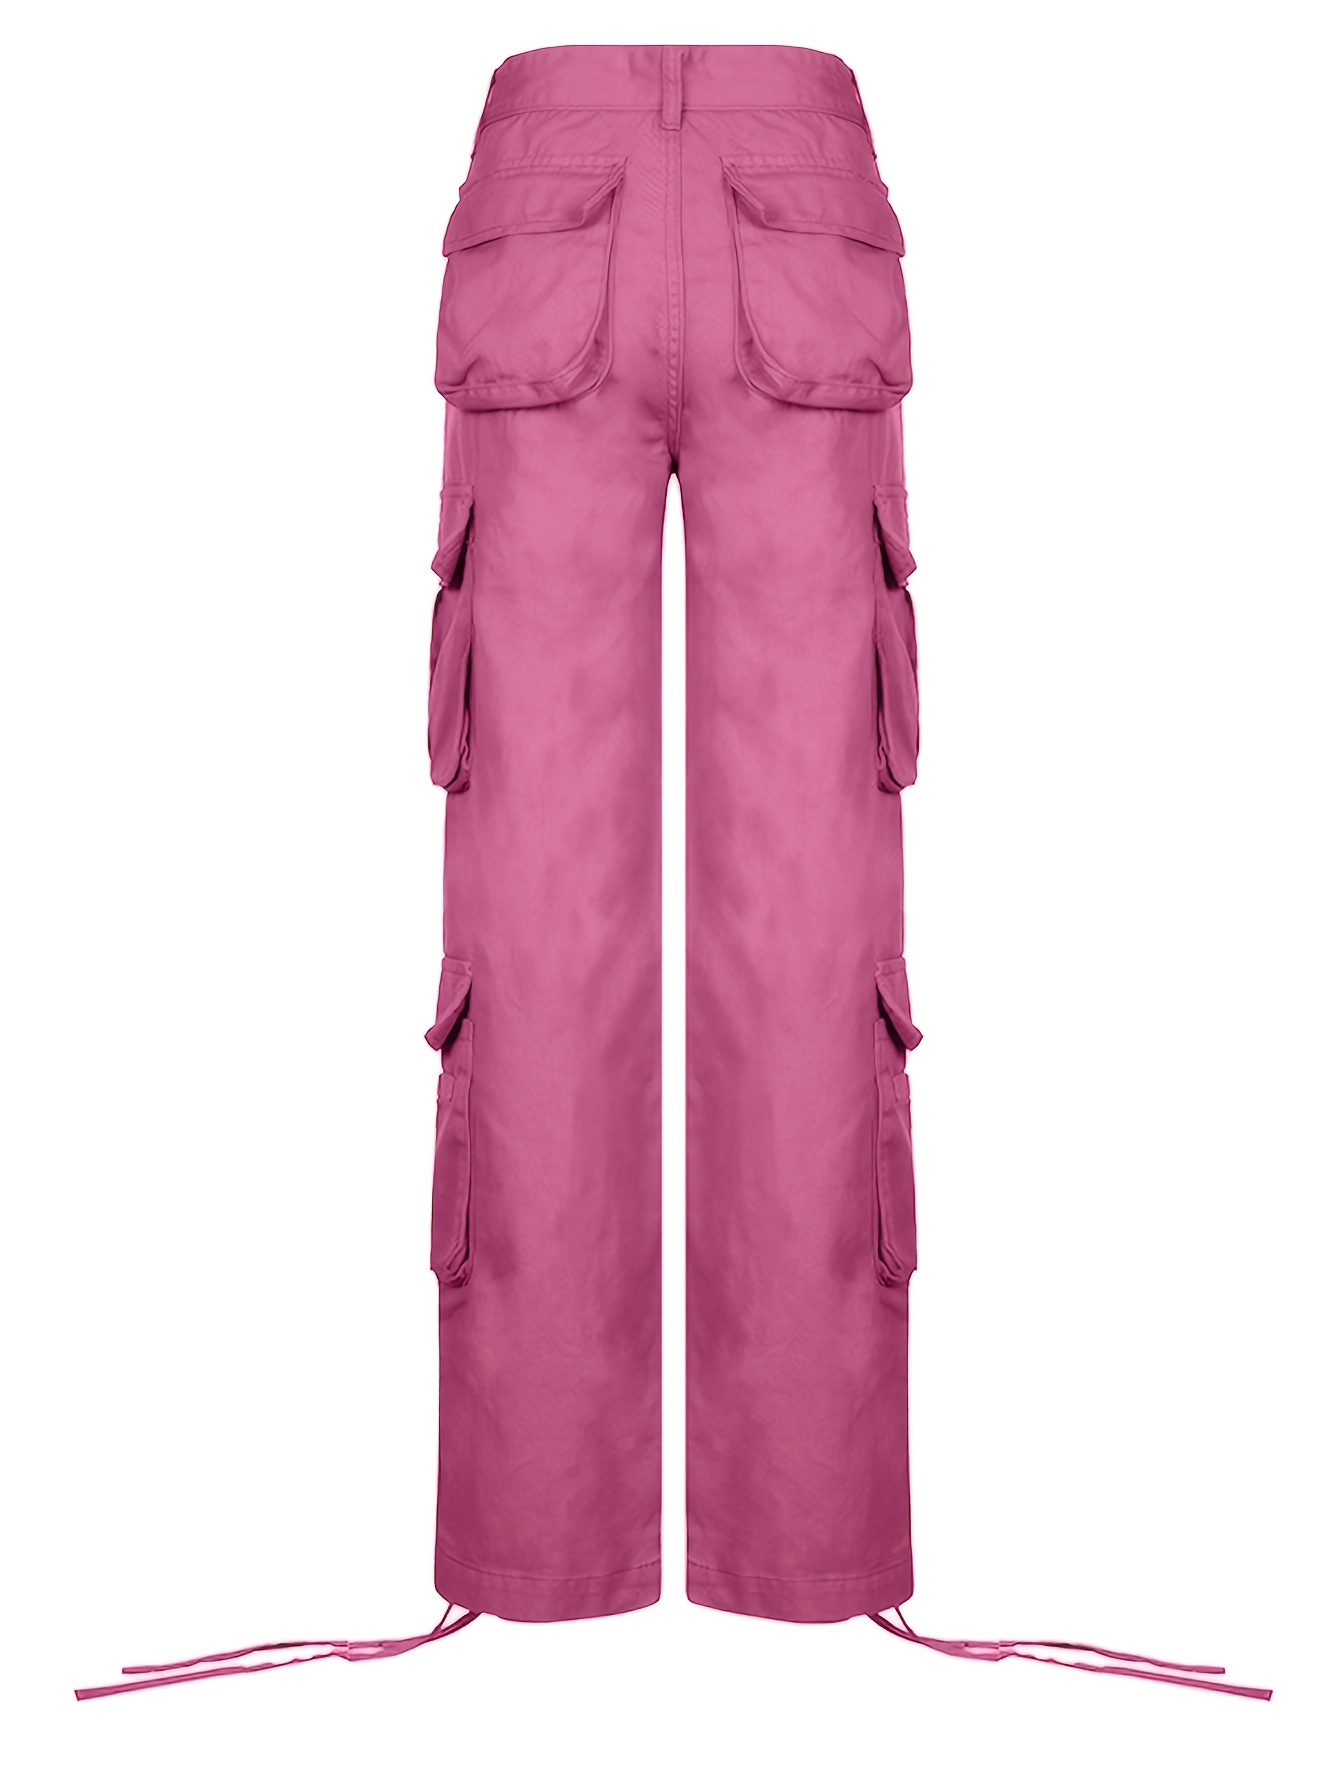 Loose Cargo Pants For Women